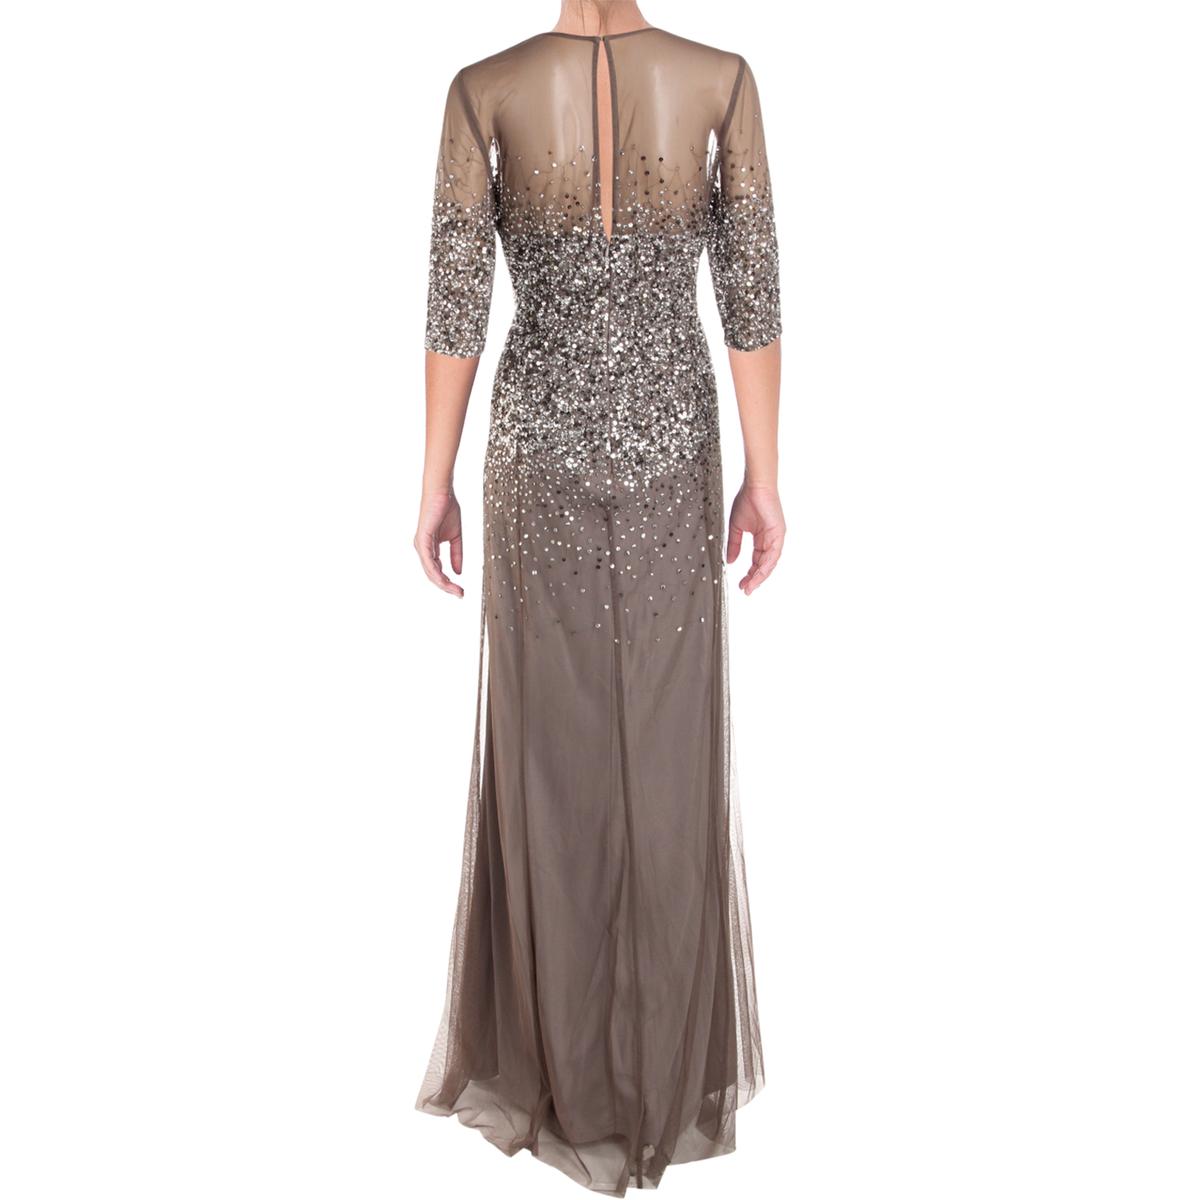 Adrianna Papell Womens Gray Sequined Full-Length Evening Dress Gown 4 ...